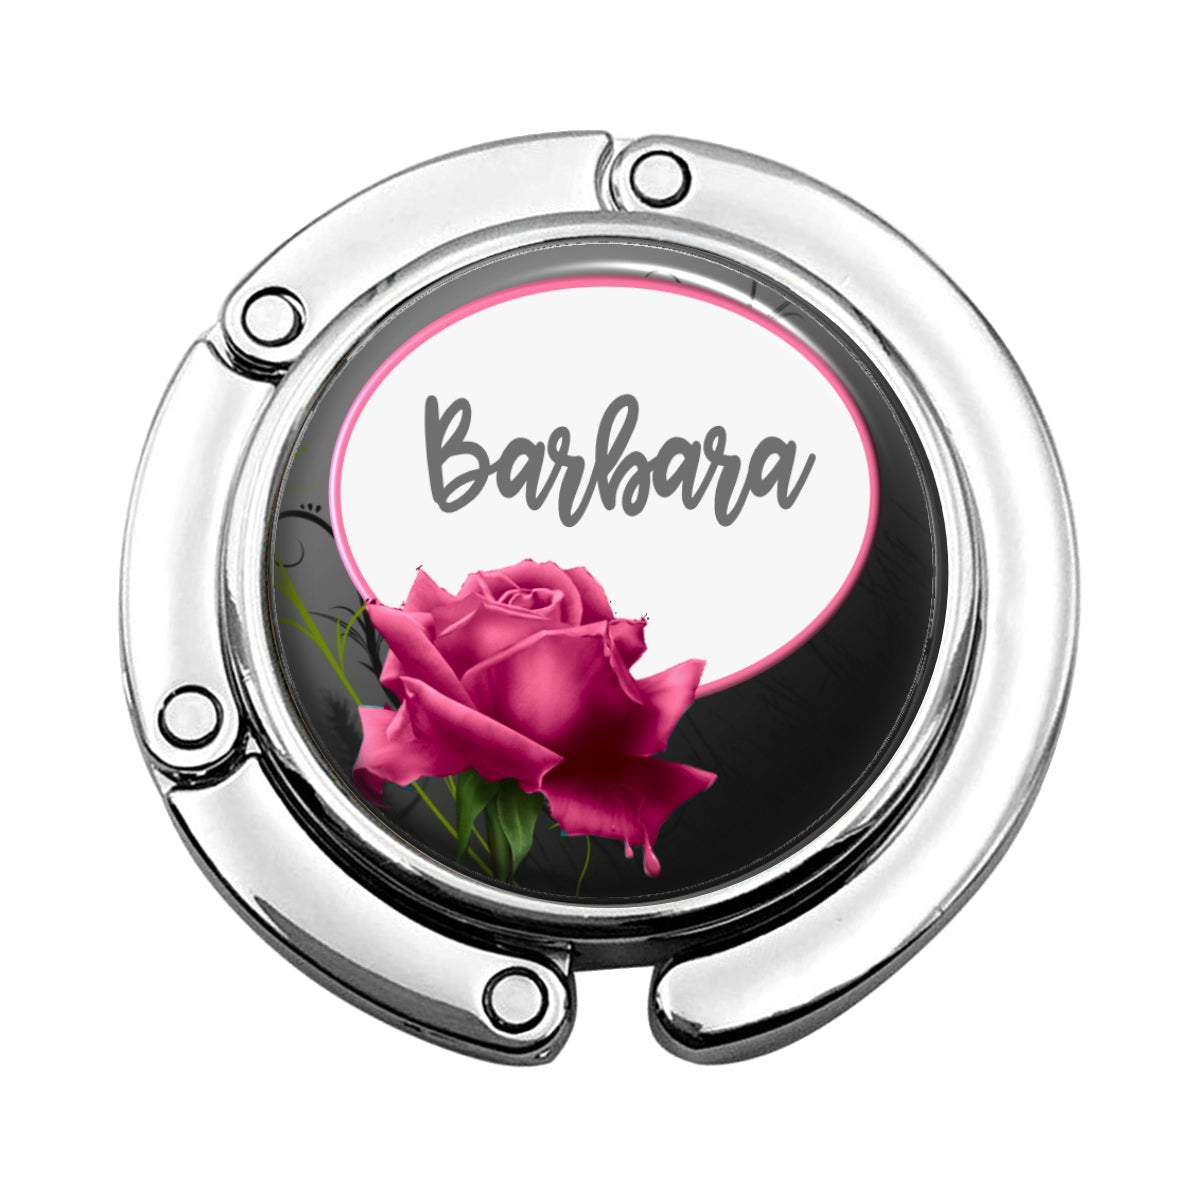 a pink rose sitting on top of a metal object